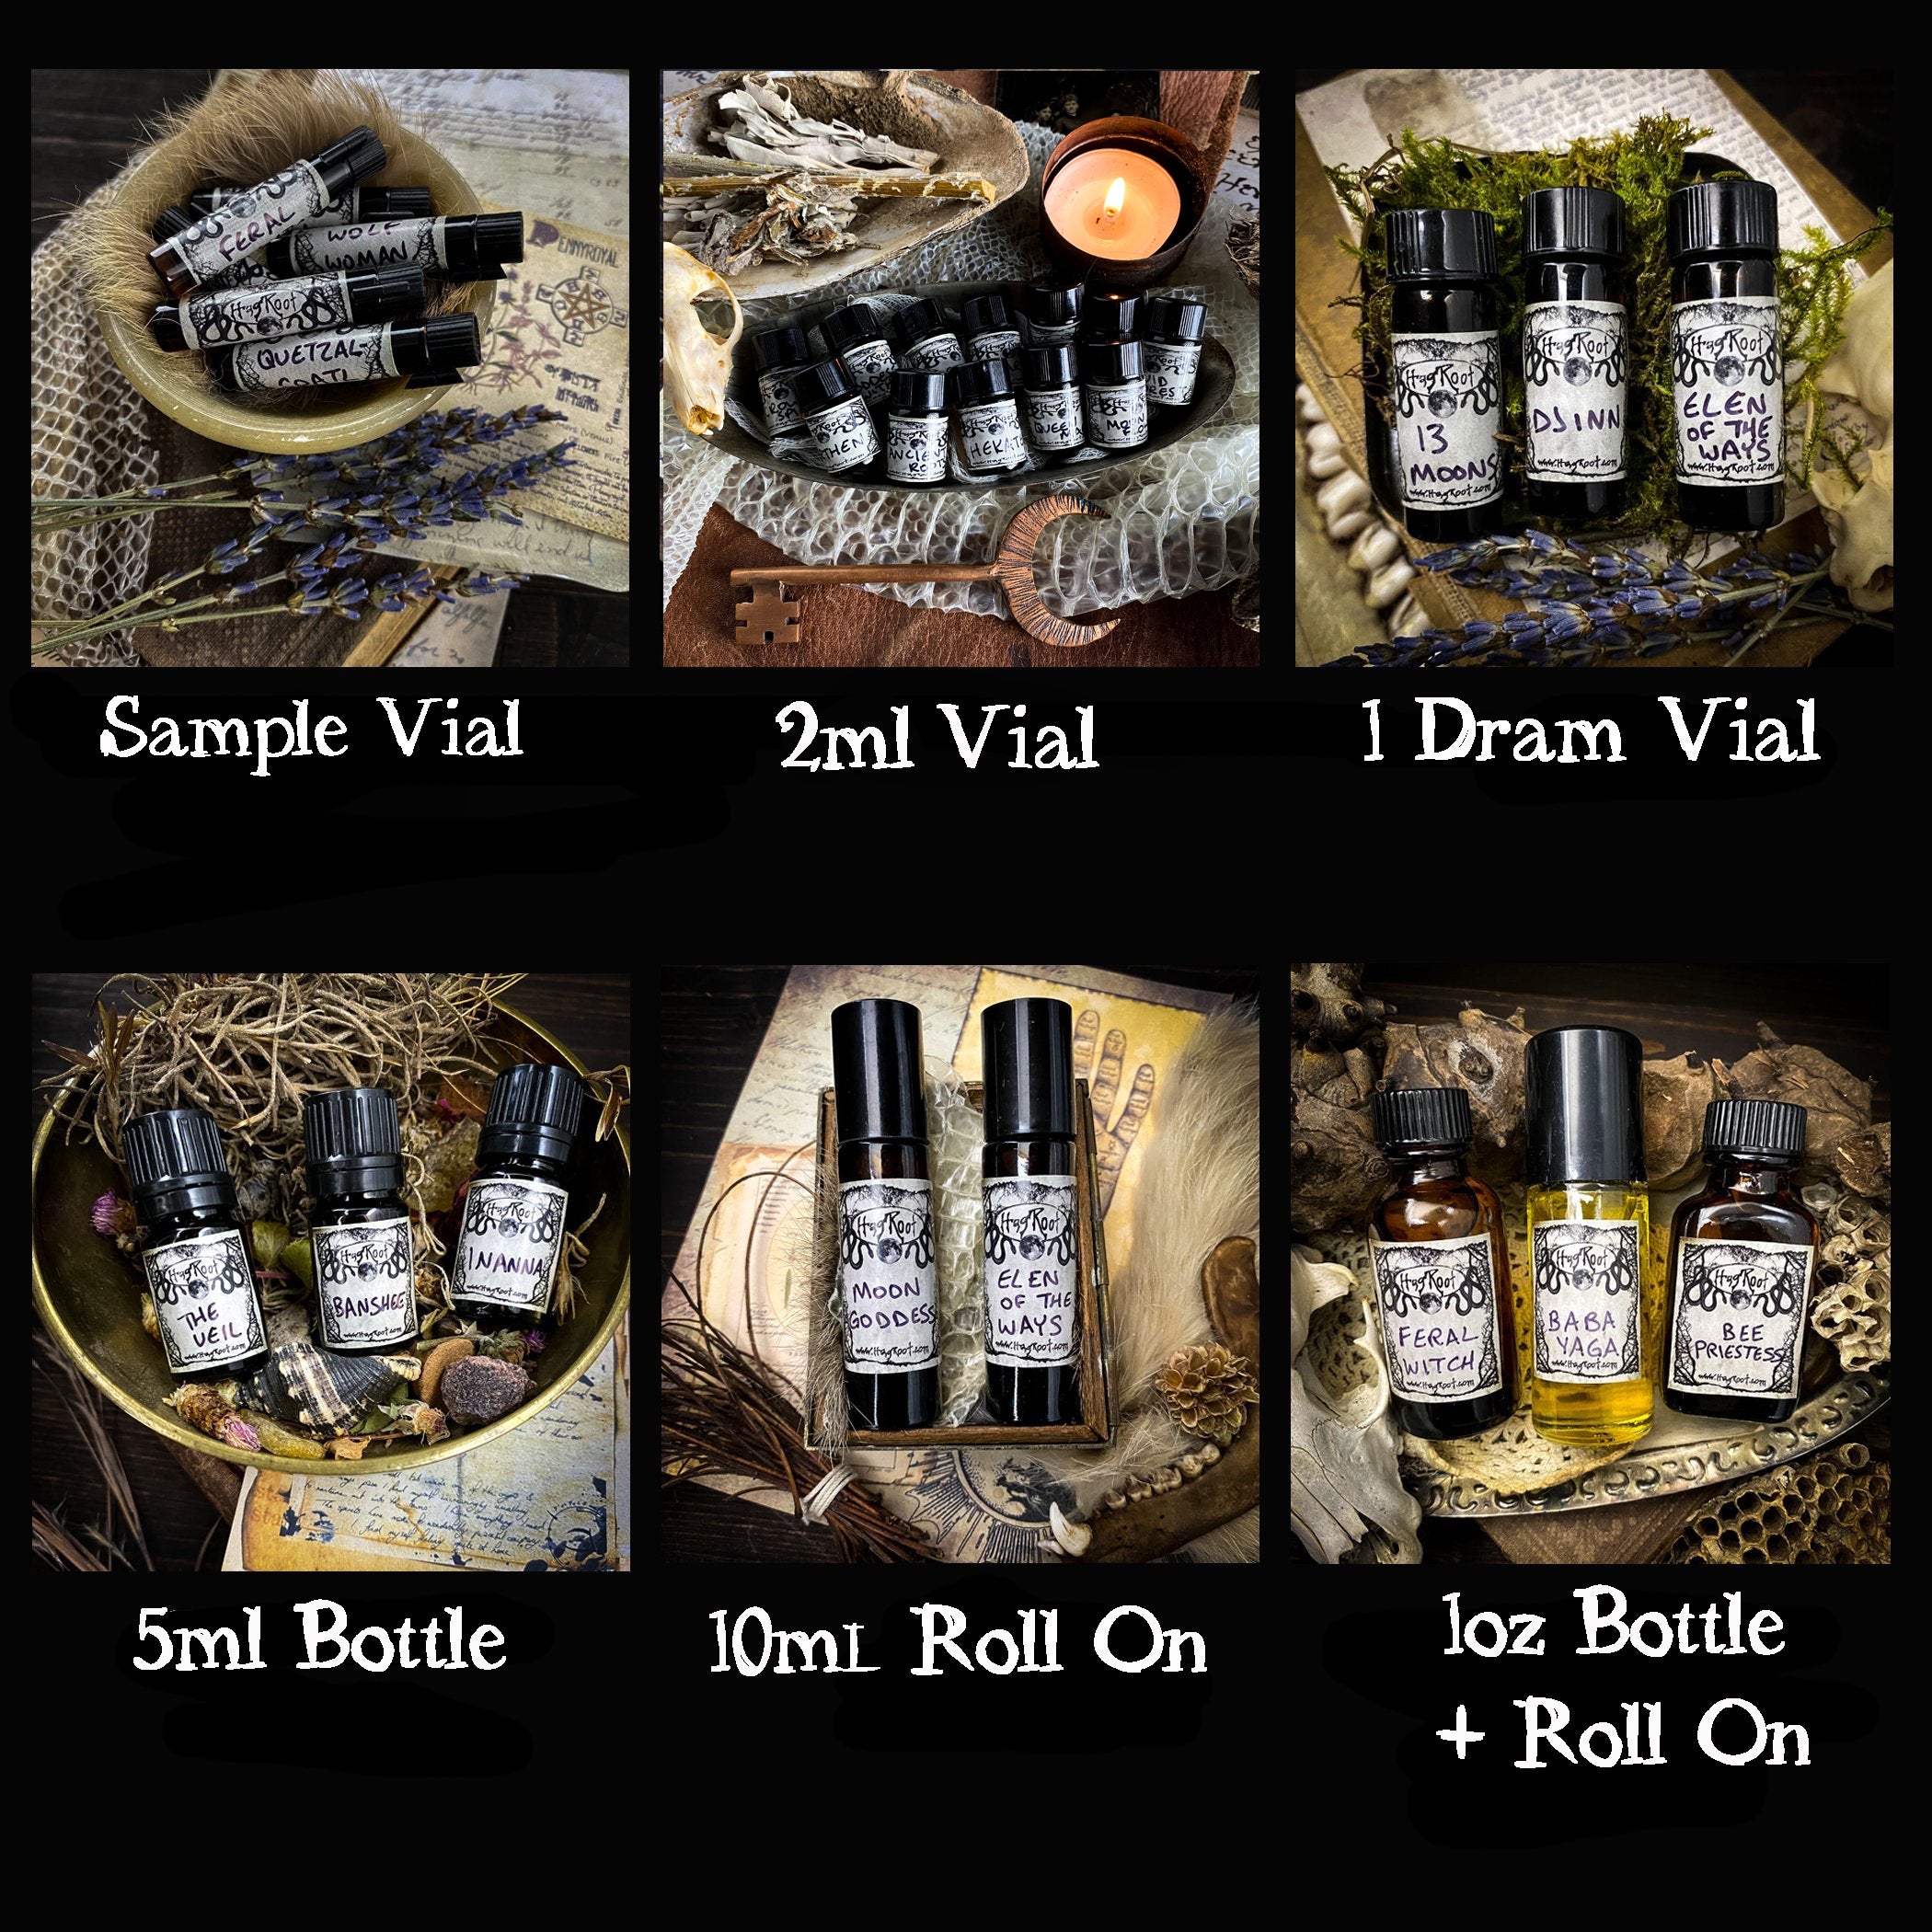 RITUAL-(Birch, Spruce, Frankincense, Hawthorn Berry, Moss, Pinion Wood, Narcissus, Leather)-Perfume, Cologne, Anointing, Ritual Oil